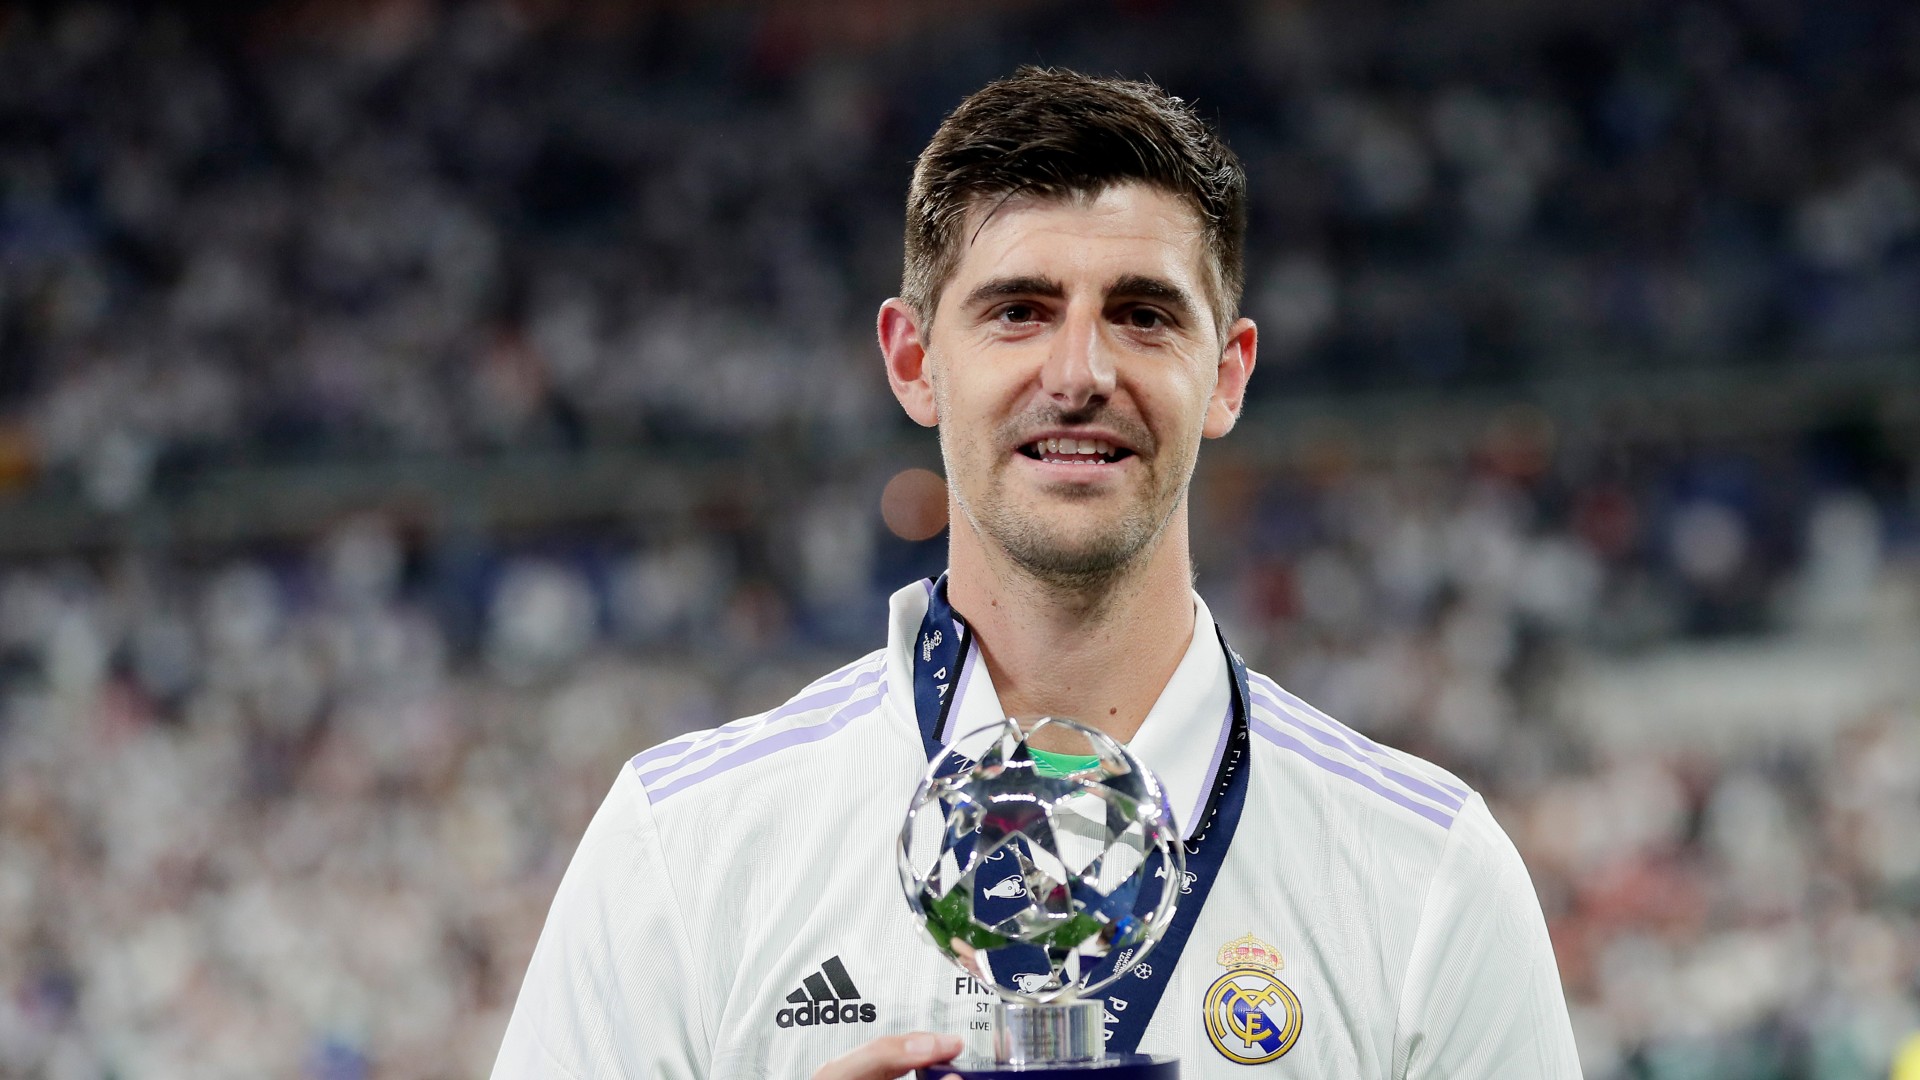 How Real Madrid's Thibaut Courtois earned UEFA Champions League final 2022 man of the match award and confirmed his place among world's best goalkeepers vs. Liverpool